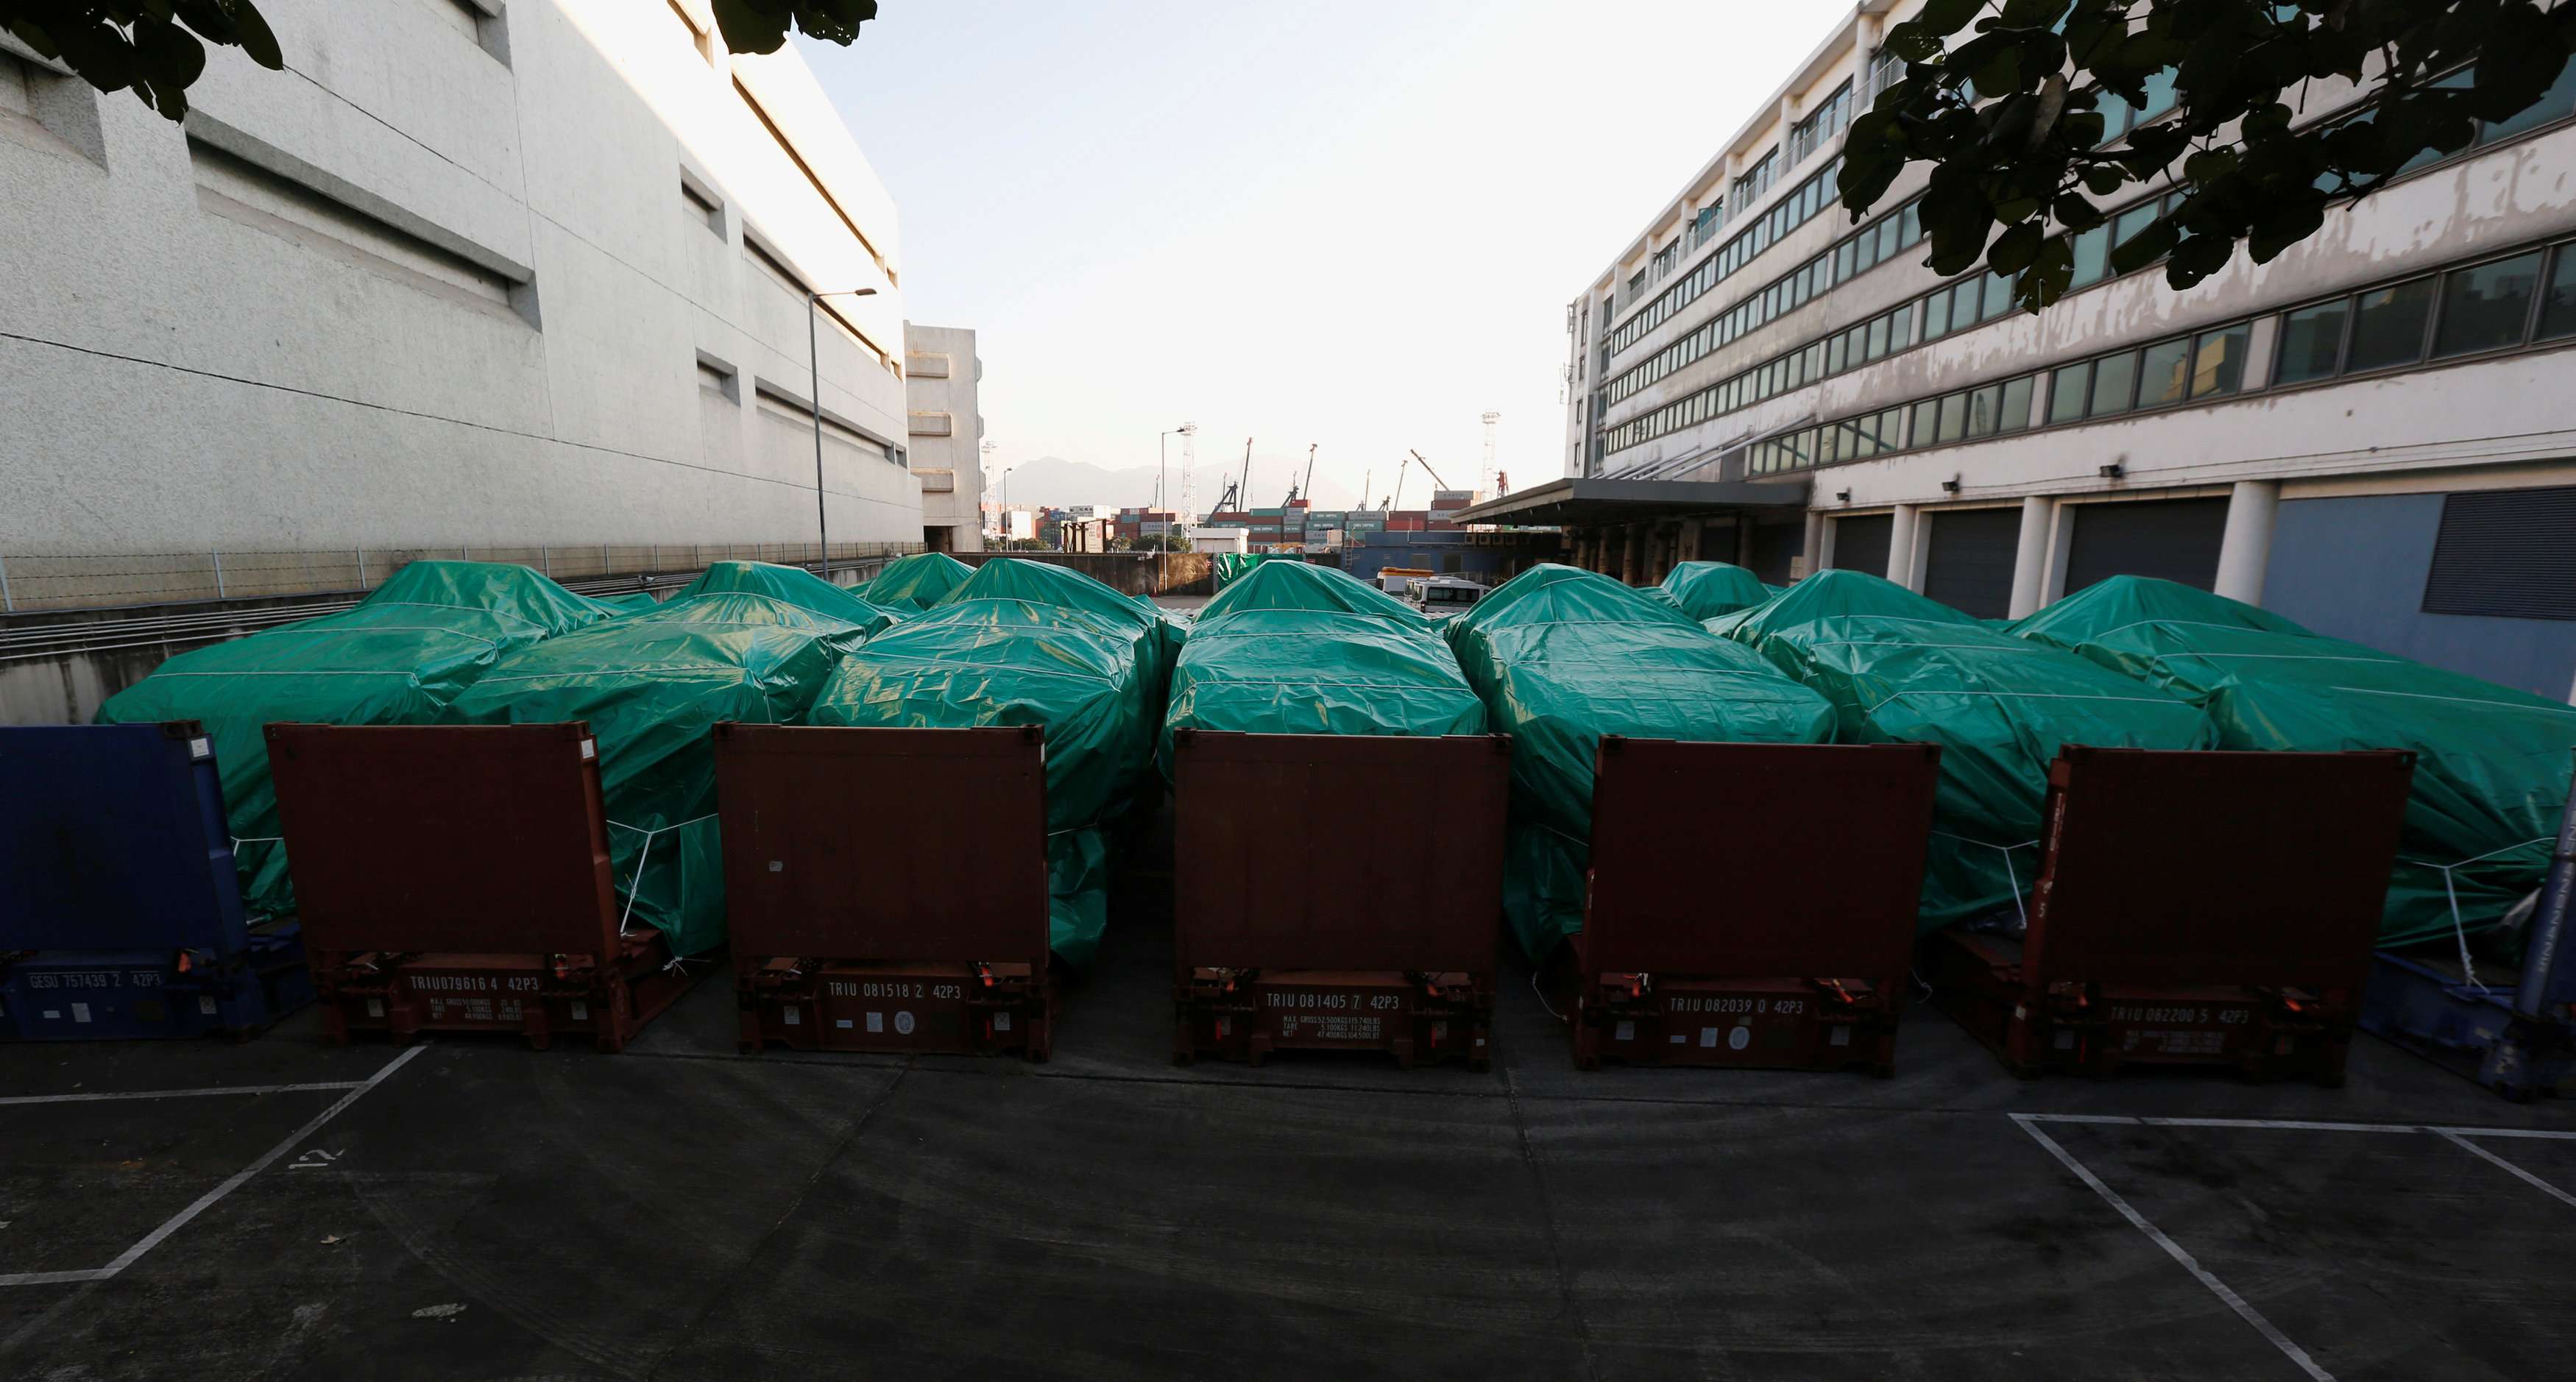 Armoured troop carriers, belonging to Singapore, are detained at a cargo terminal in Hong Kong. Photo: Reuters